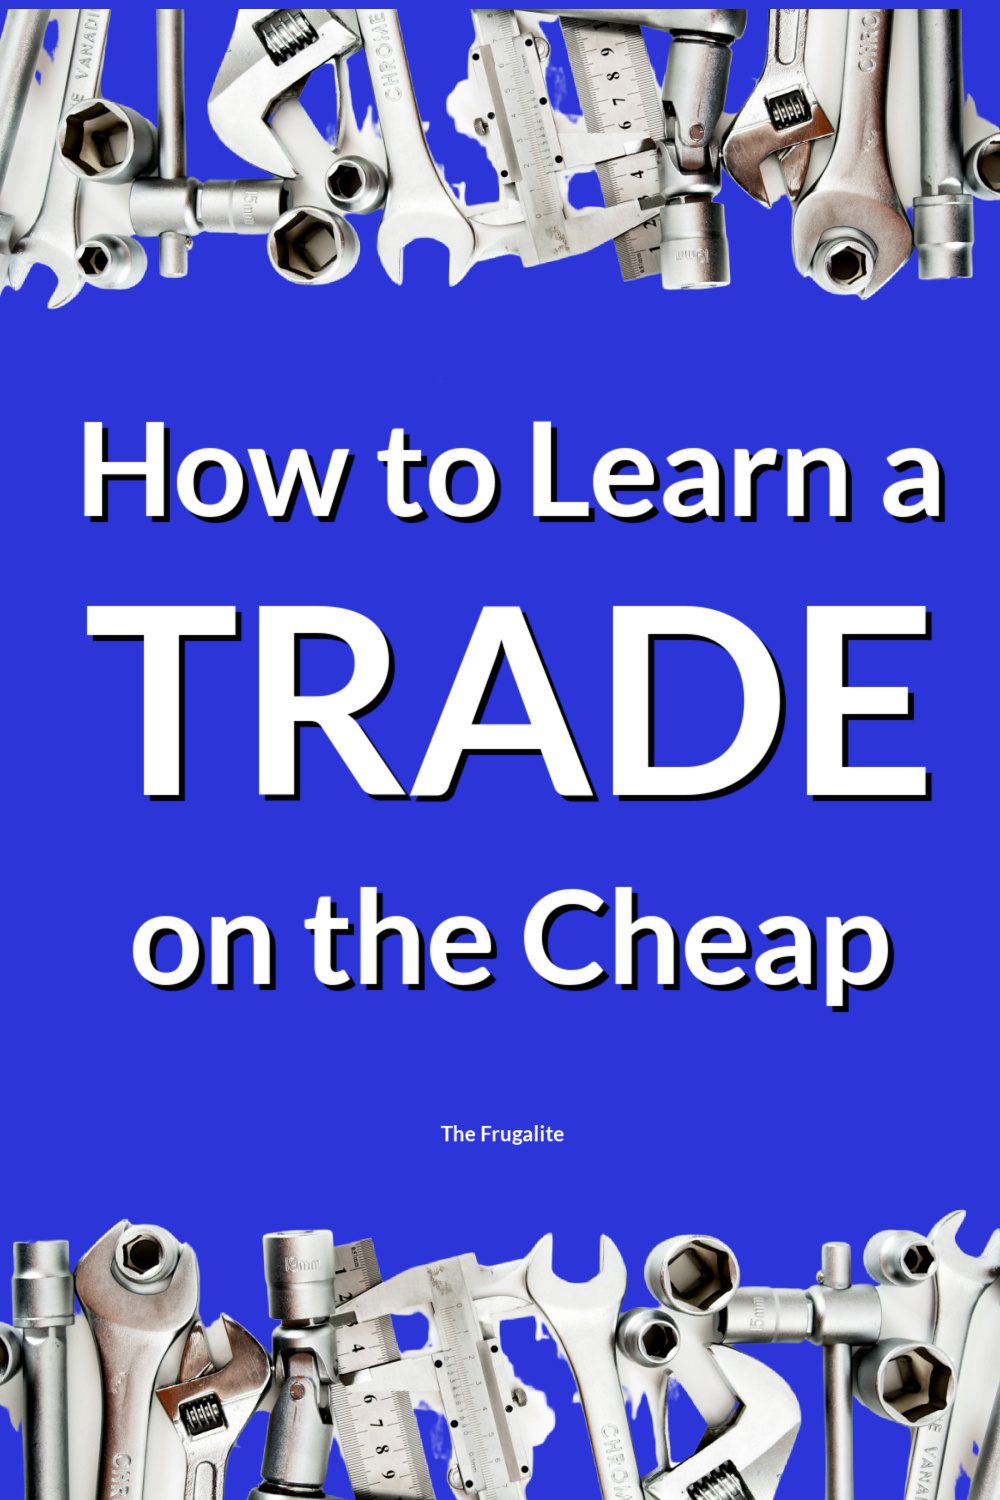 How to Learn a Trade on the Cheap